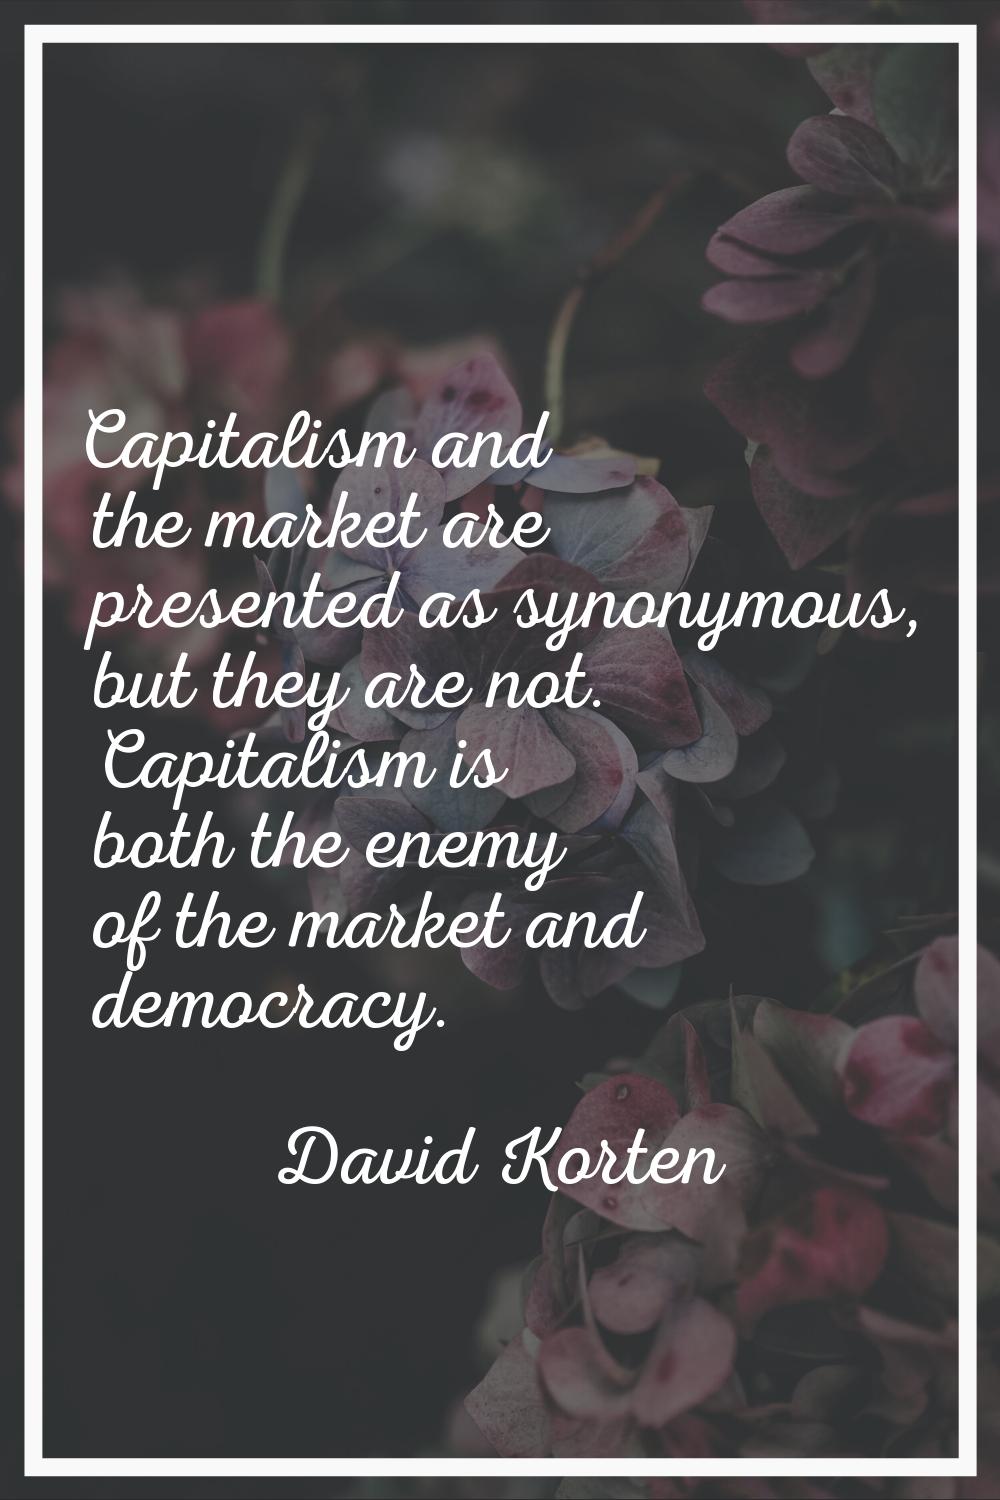 Capitalism and the market are presented as synonymous, but they are not. Capitalism is both the ene